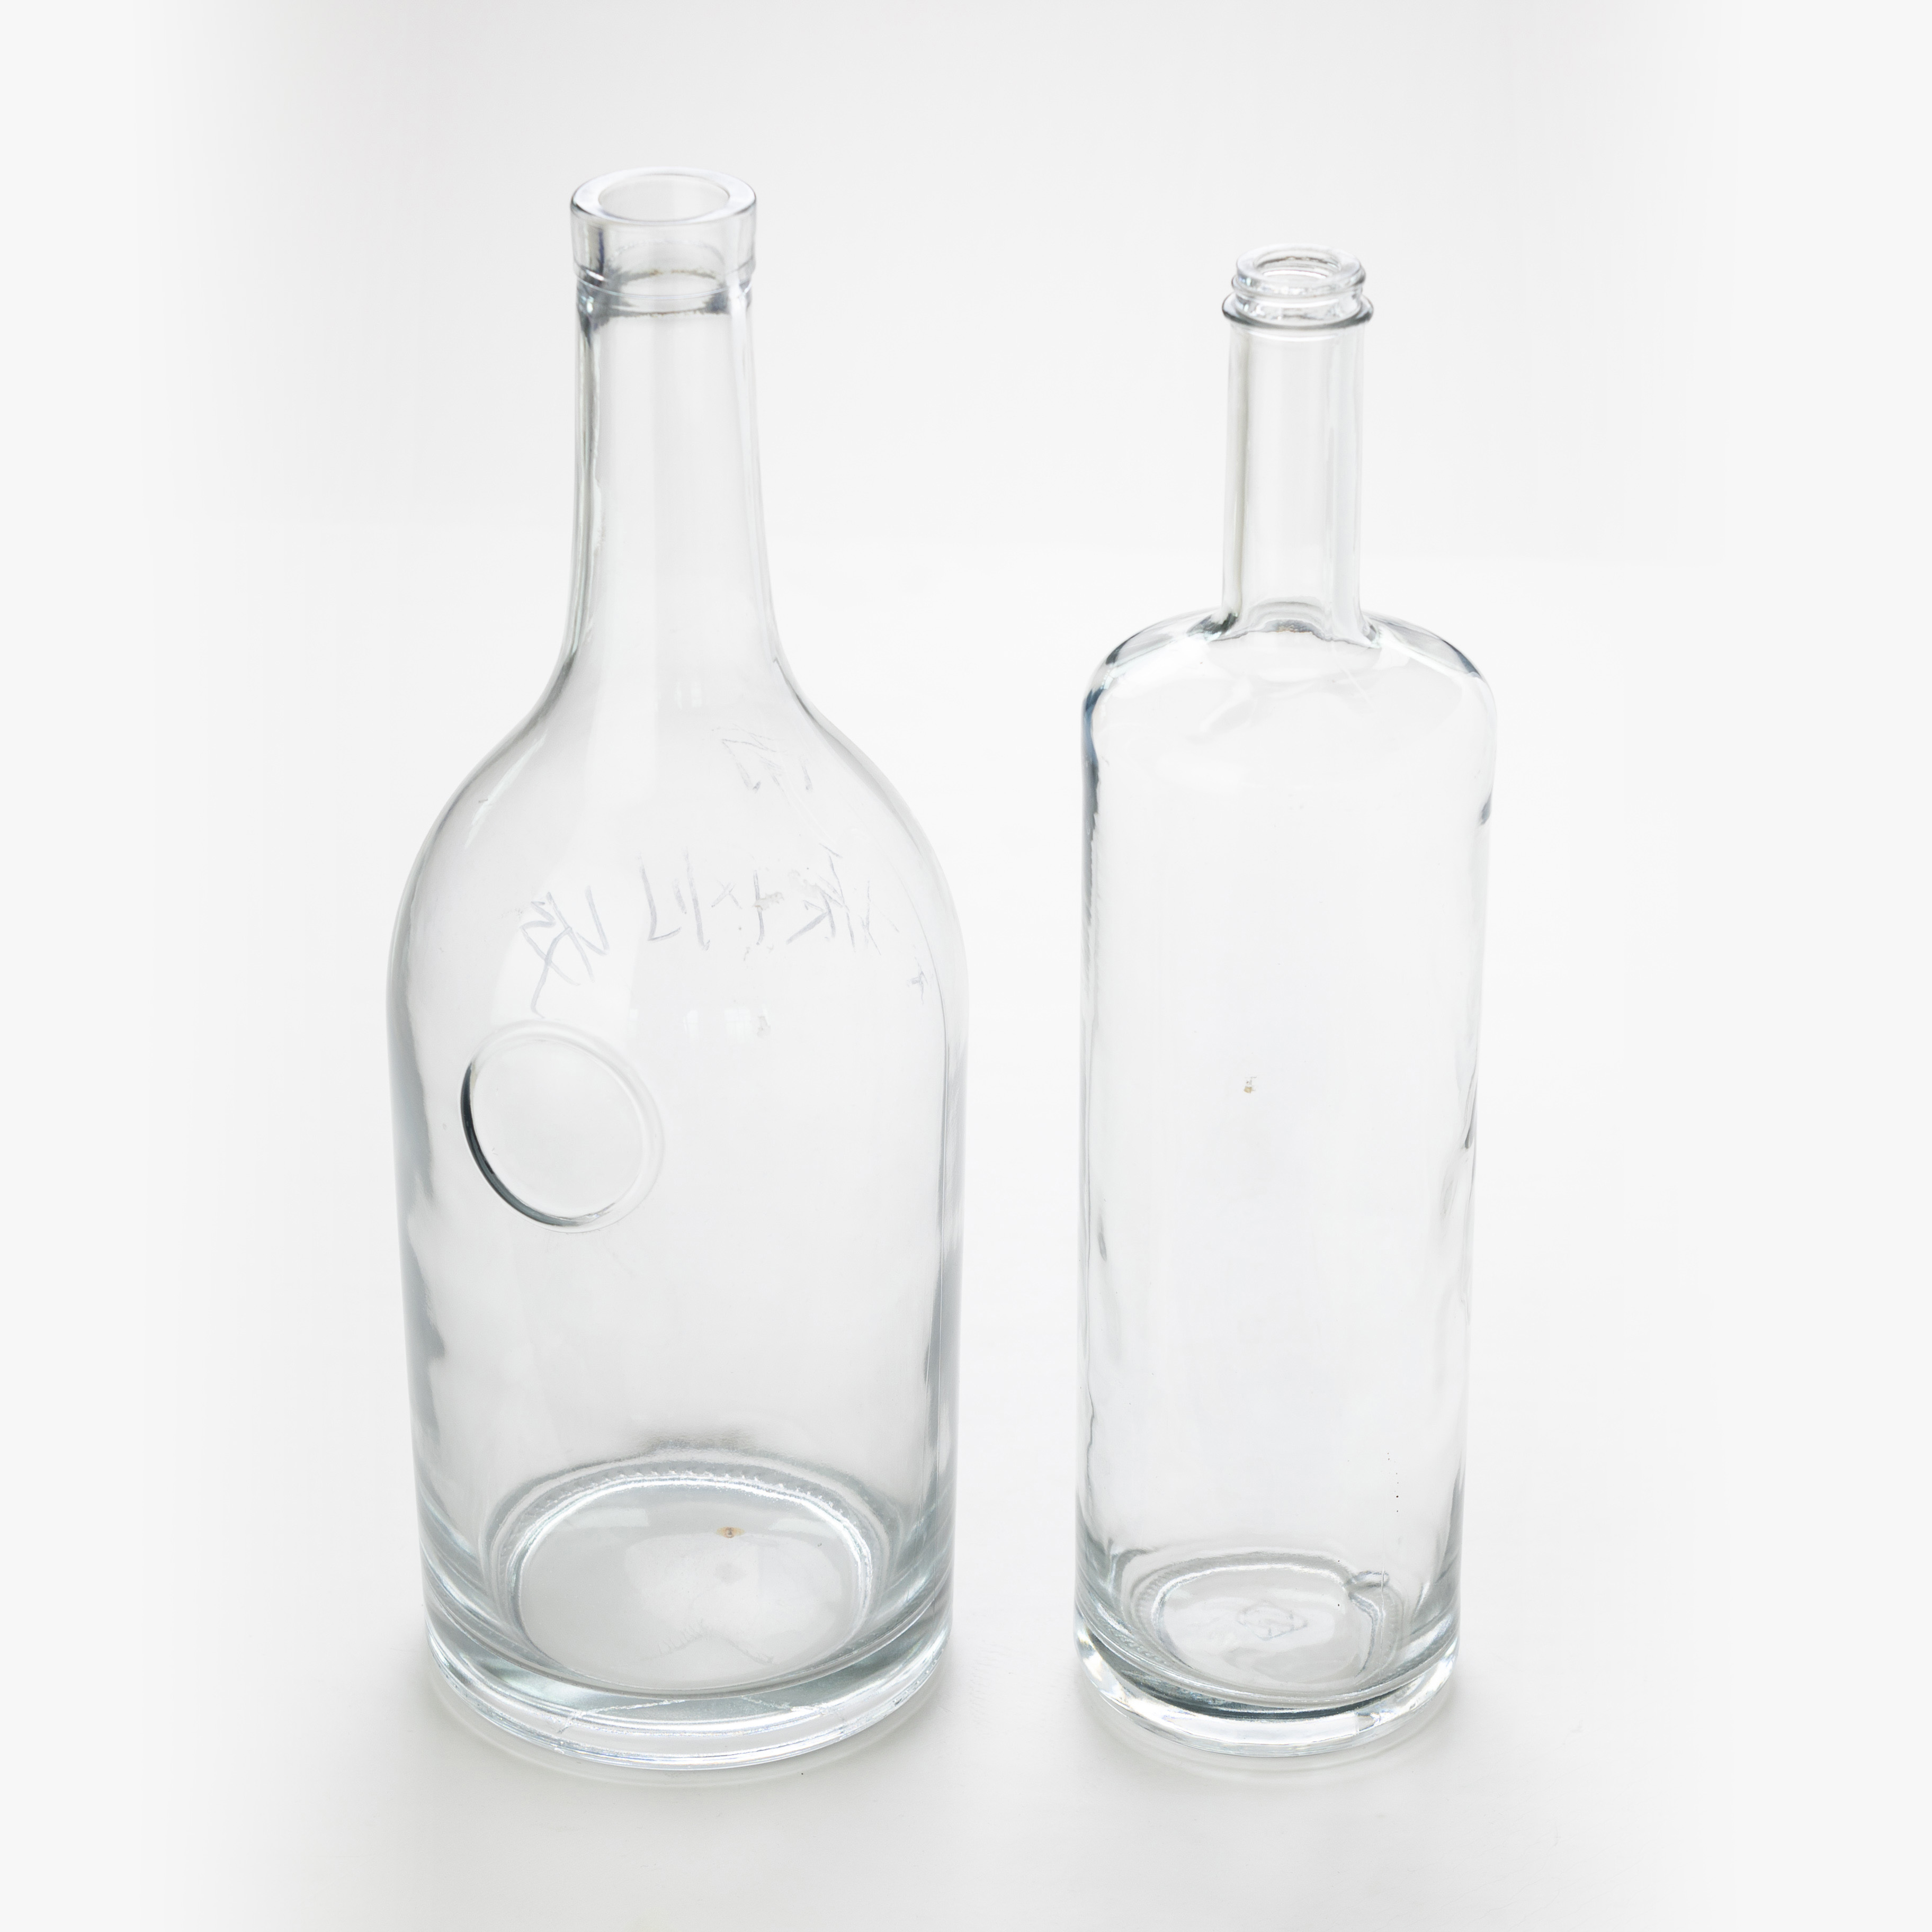 Different shape siprits glass bottle